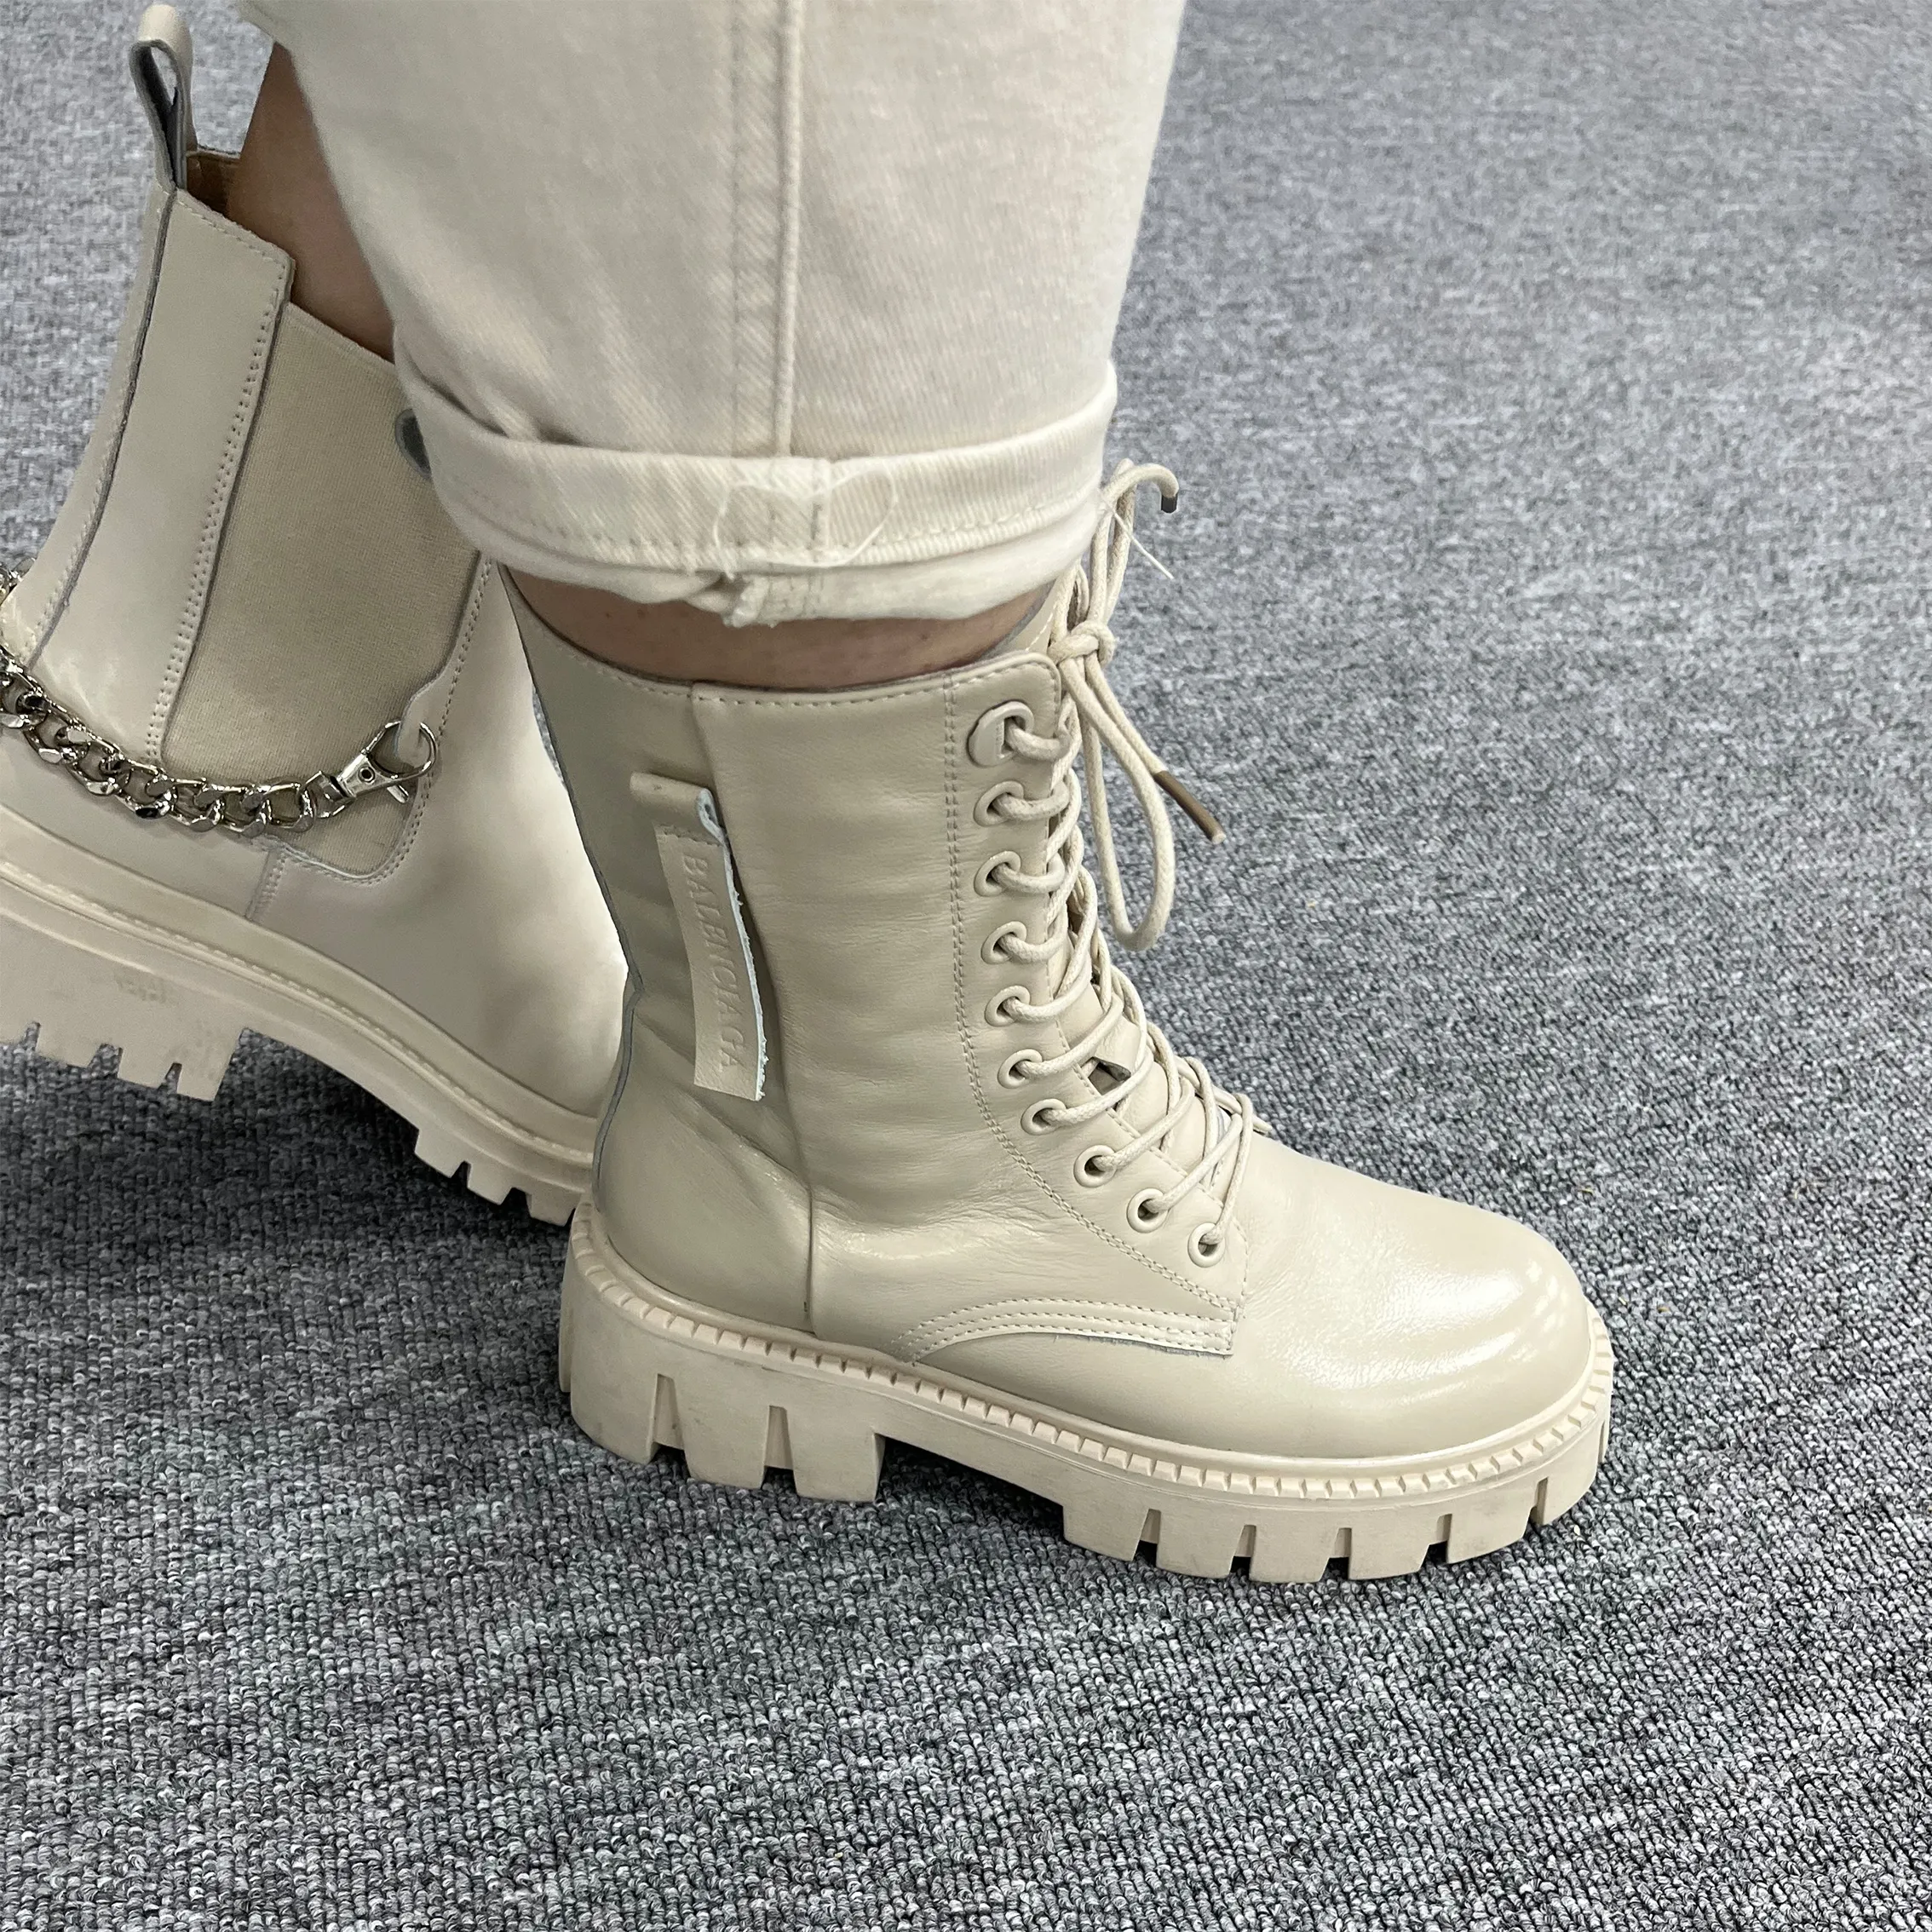 Safe Thick Low Waterproof The Latest Cheap Winter Boots For Outdoor Warm Ankle Heel Women